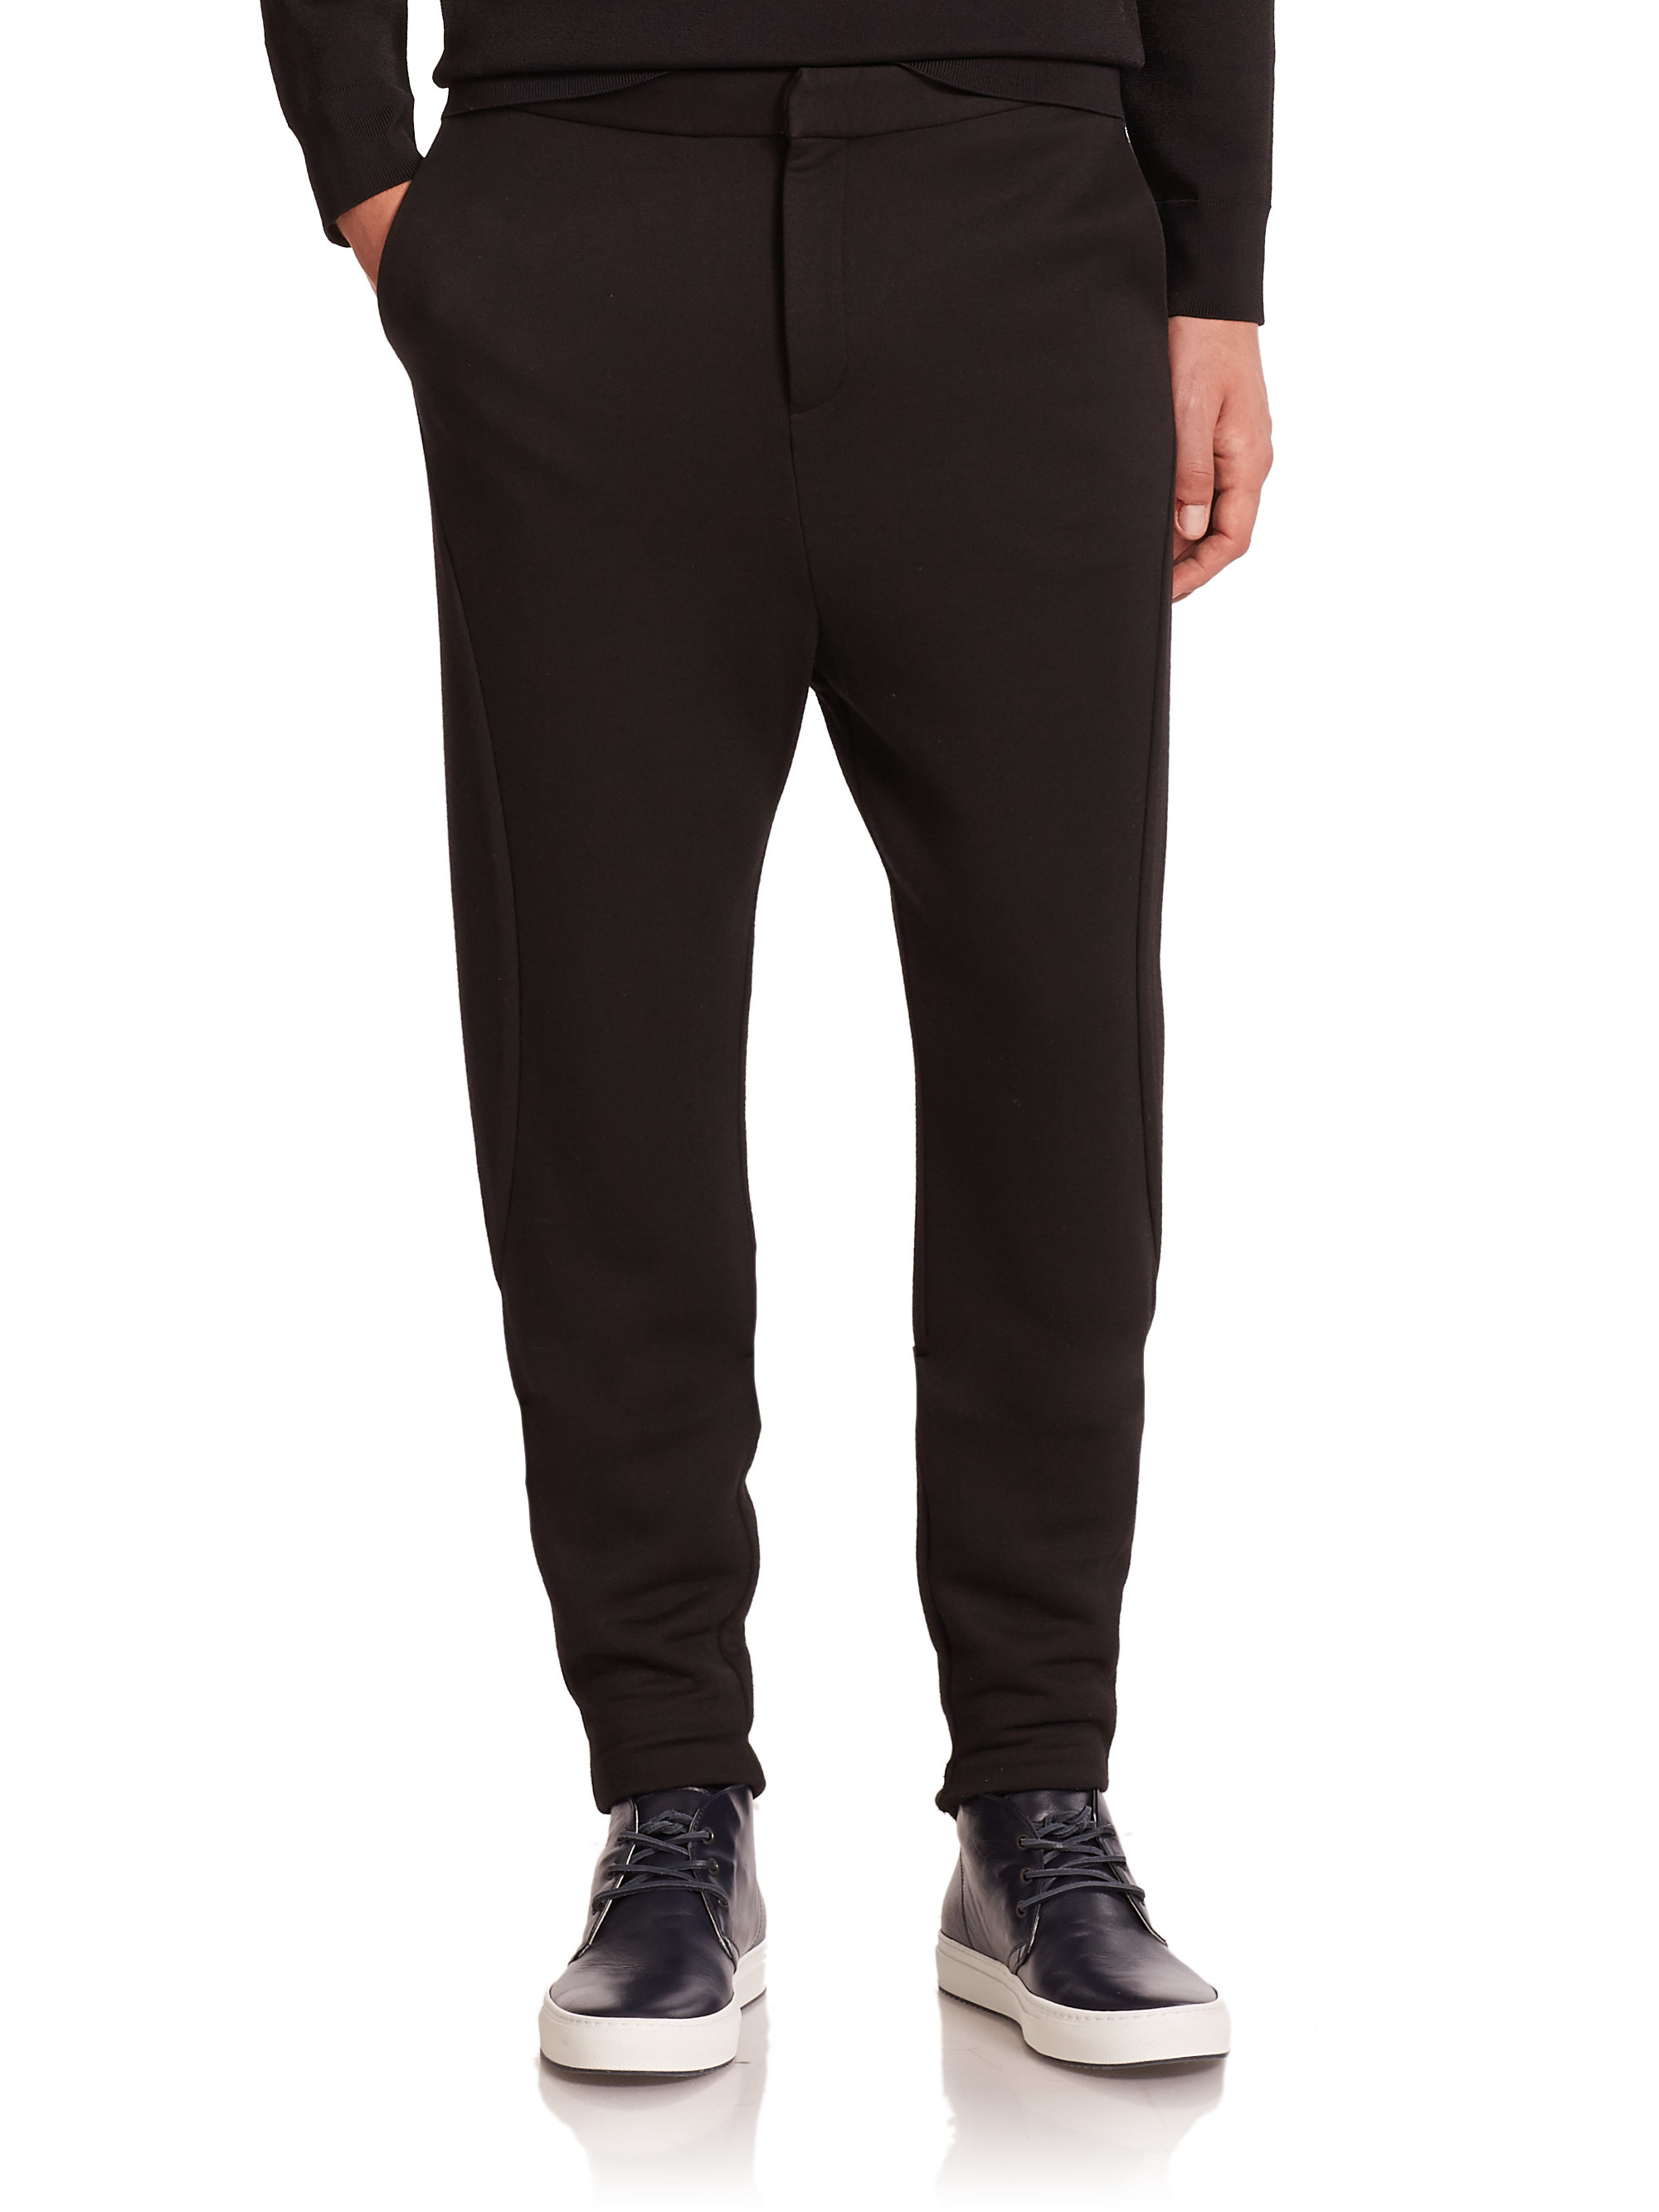 Lyst - T By Alexander Wang Double Knit Track Pants in Black for Men